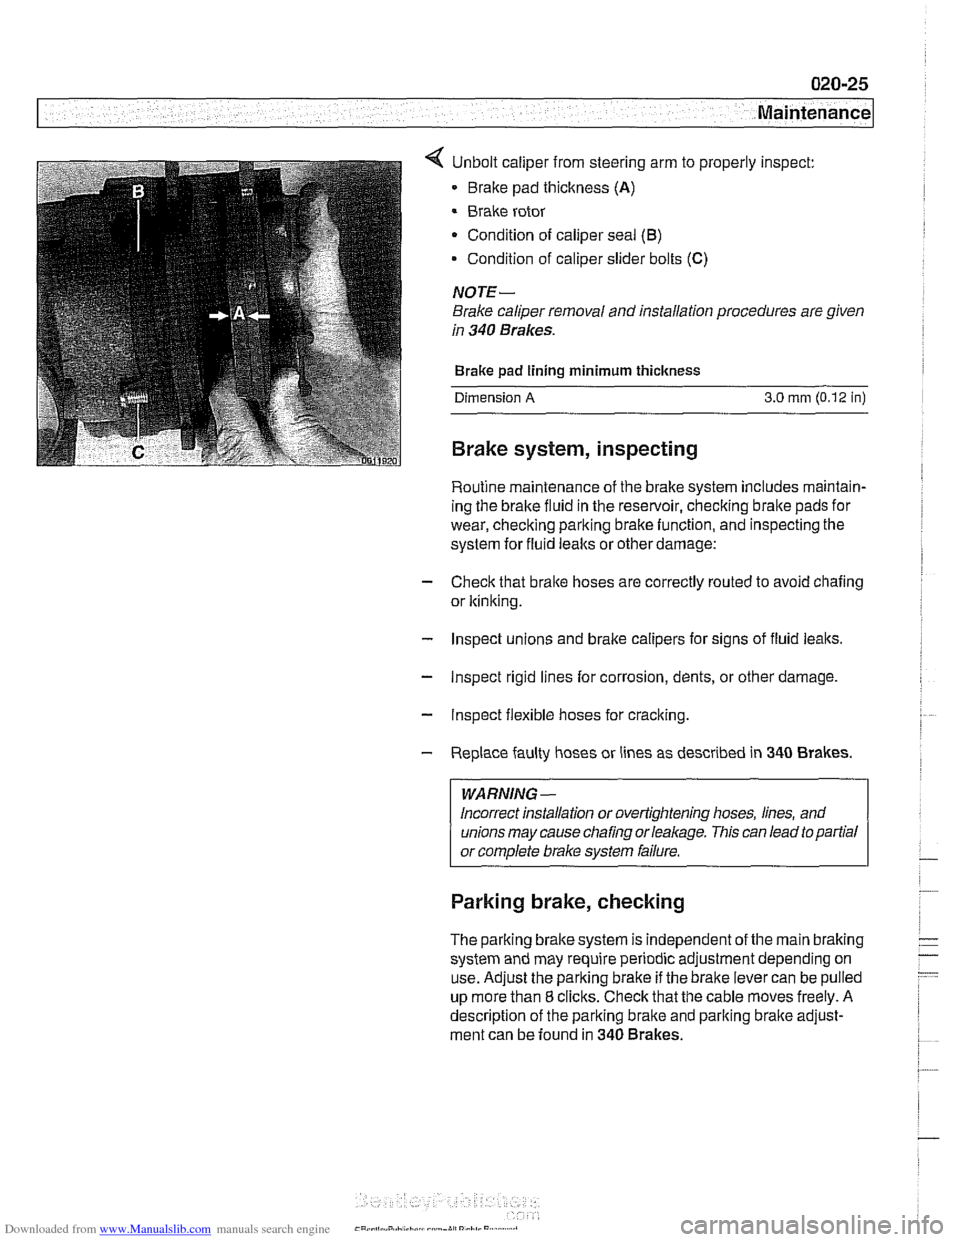 BMW 530i 2001 E39 Workshop Manual Downloaded from www.Manualslib.com manuals search engine 
7 Maintenance 
< Unbolt caliper from steering arm  to properly  inspect: 
Brake  pad thickness 
(A) 
Brake rotor 
Condition  of caliper seal 
